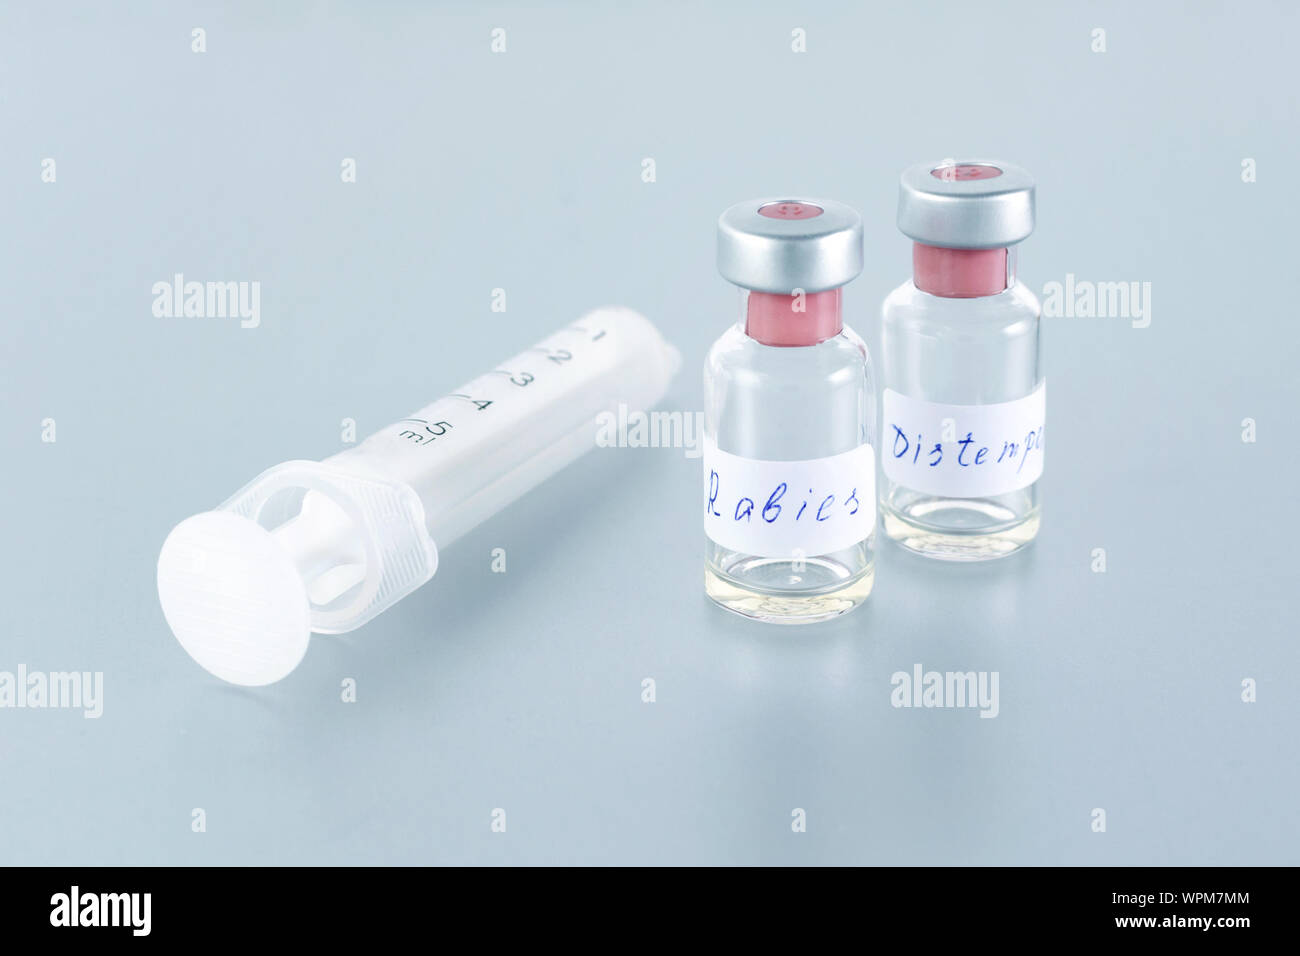 medicine bottle with rabies vaccine and distemper for animal health Stock Photo